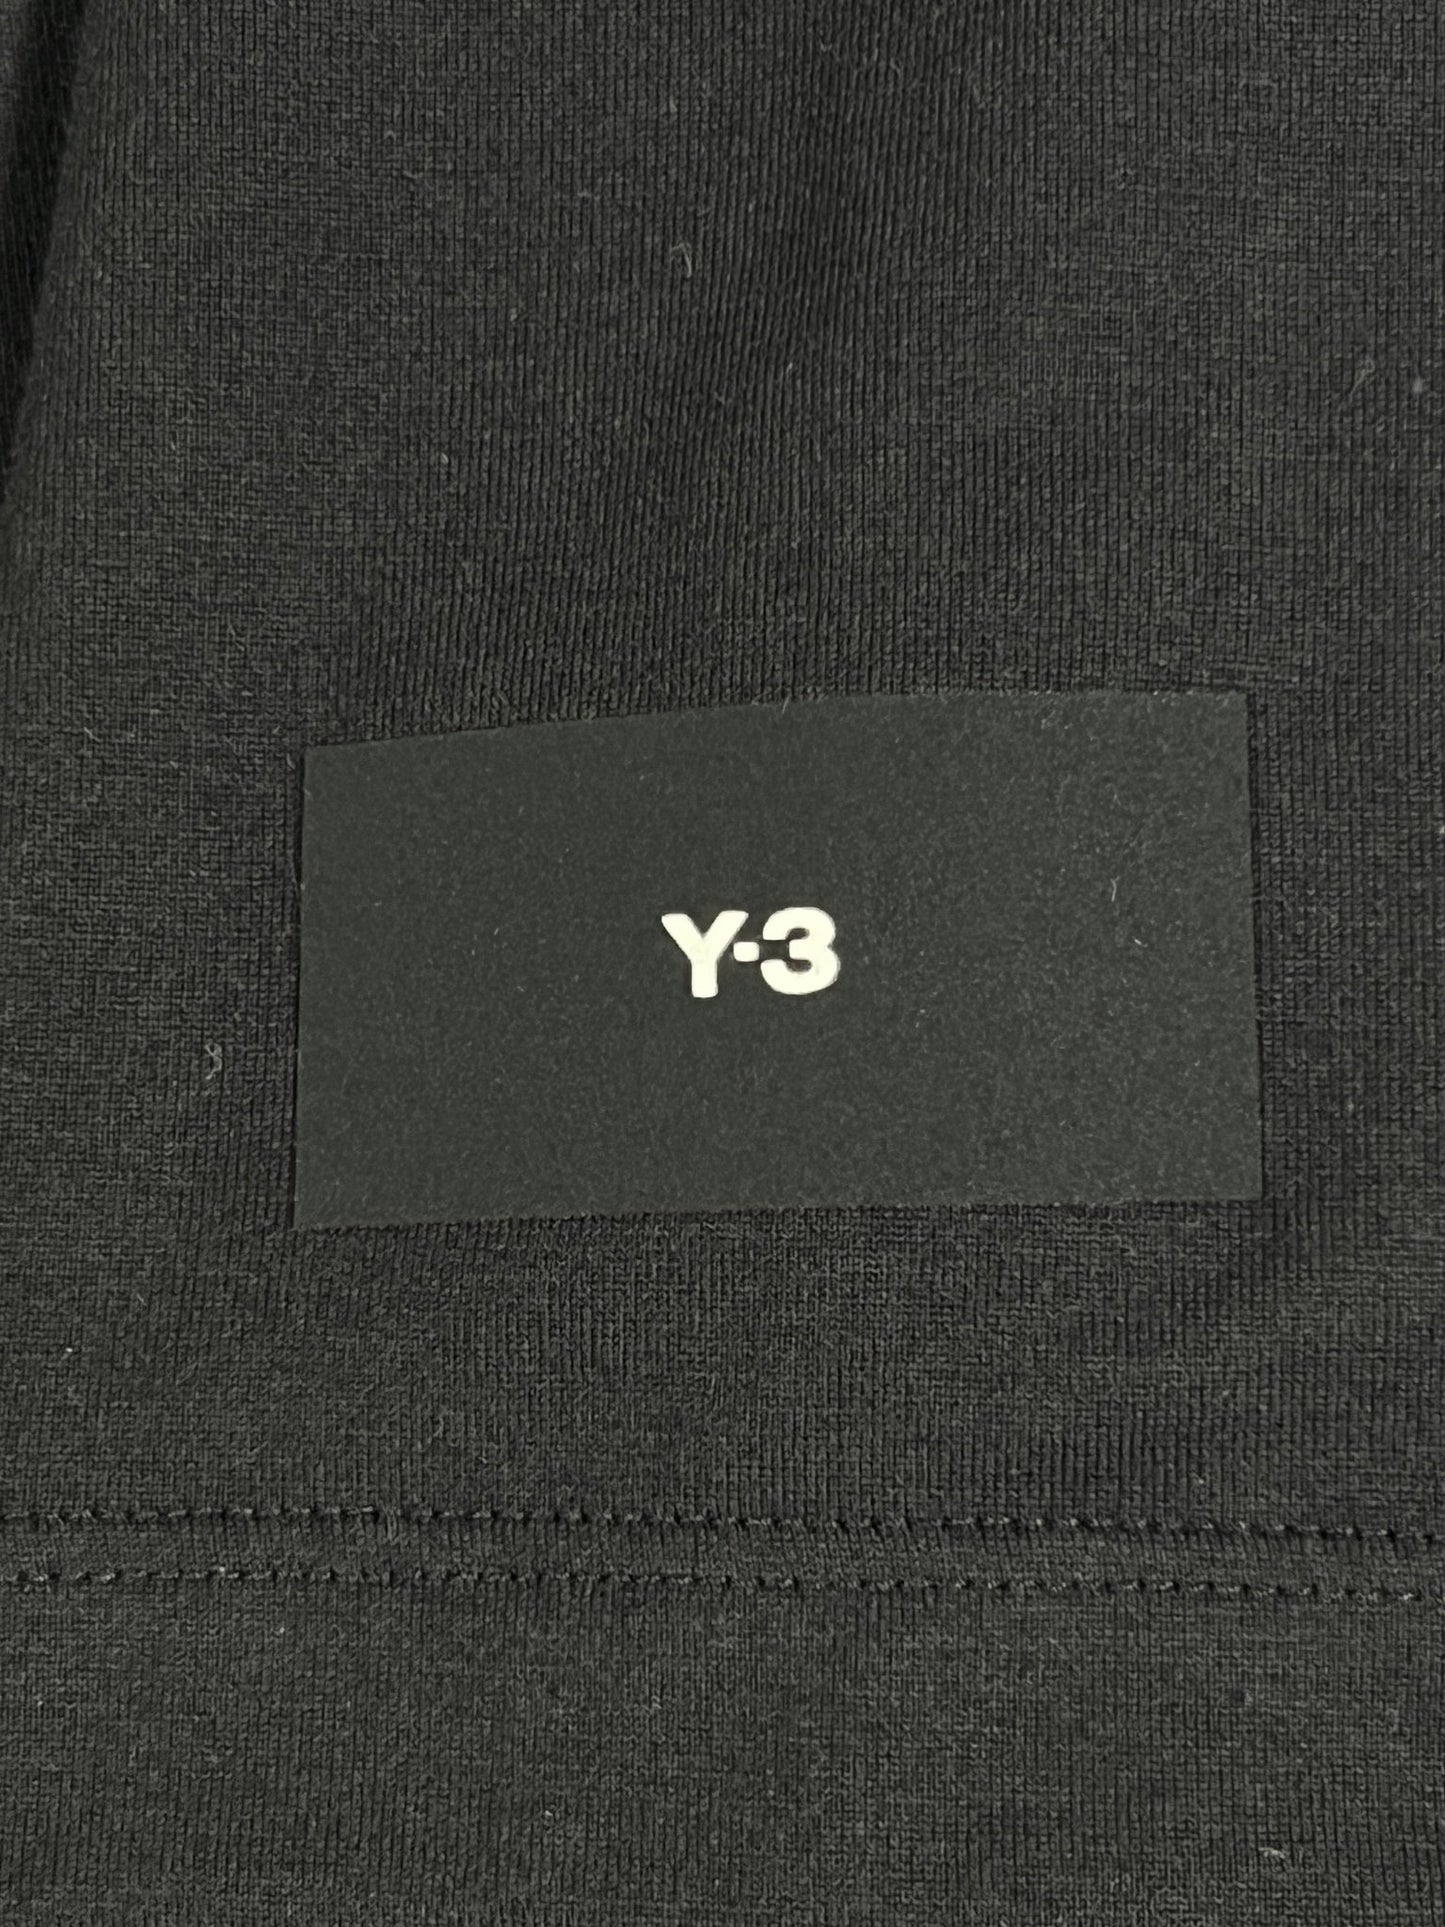 A relaxed short sleeve tee with the ADIDAS x Y-3 H44798 RELAXED SS TEE BLACK logo on it.